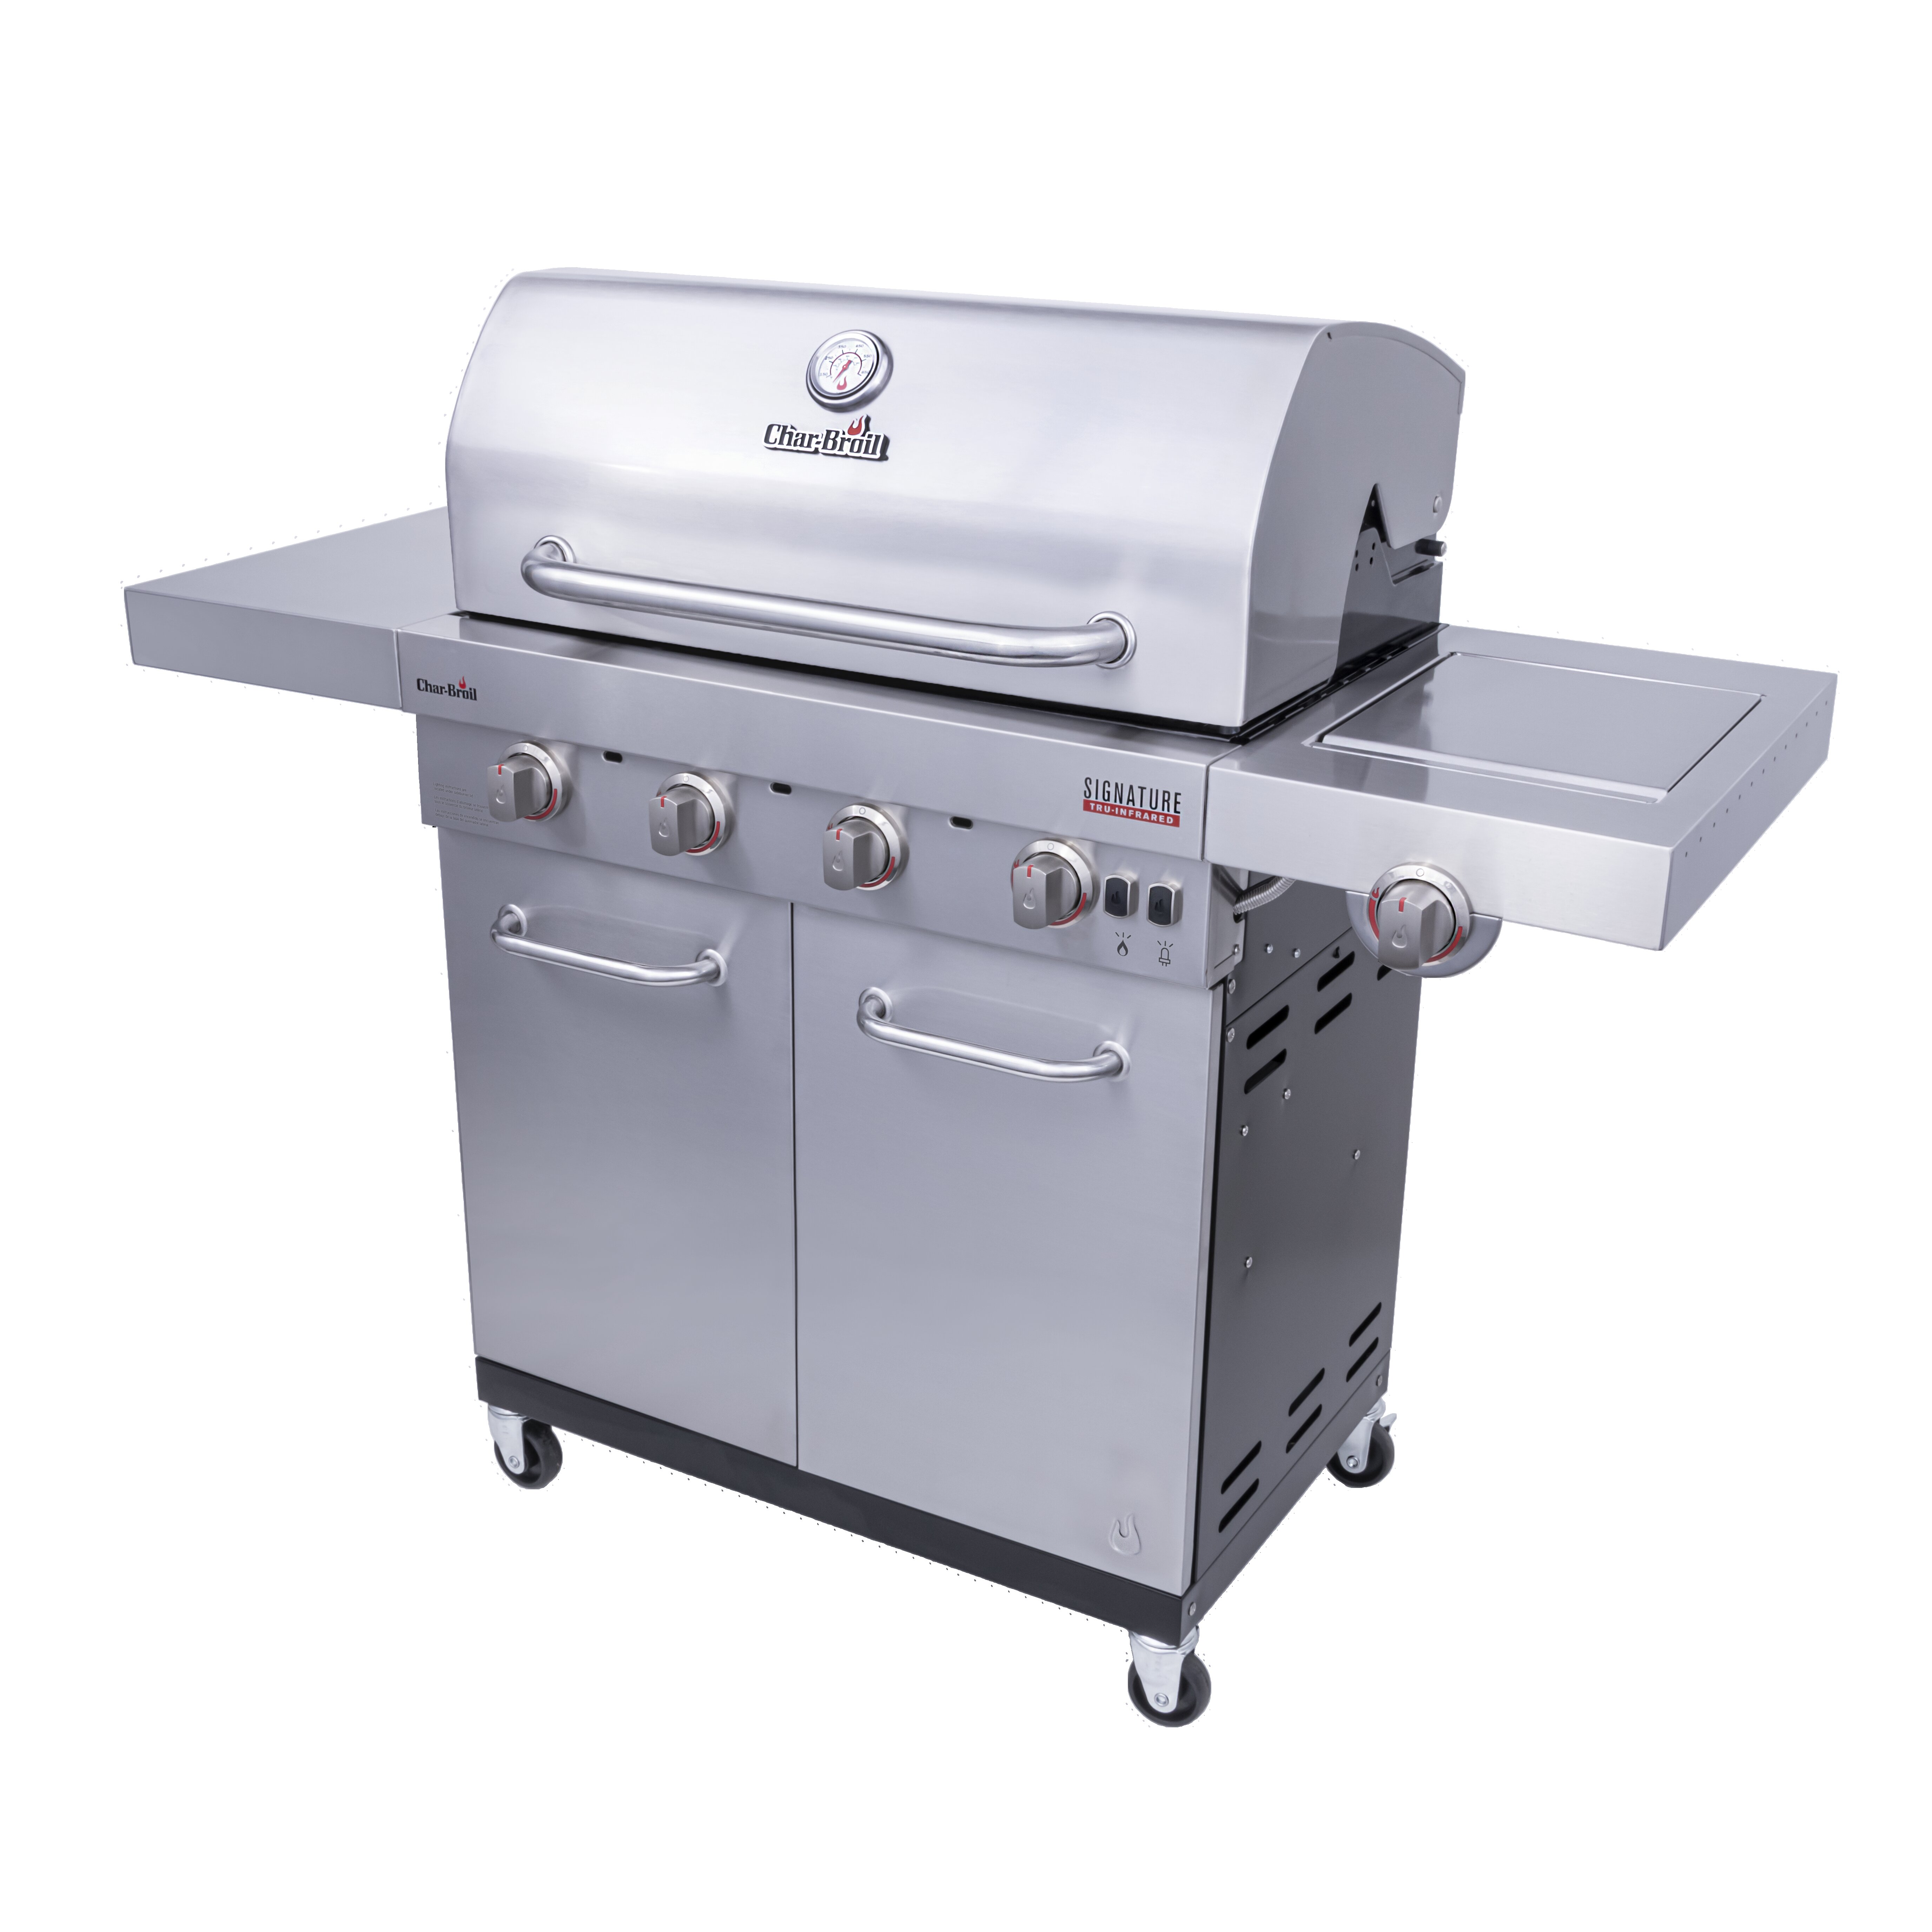 CharBroil Char-Broil Signature Propane Gas Grill with Cabinet & Reviews | Wayfair